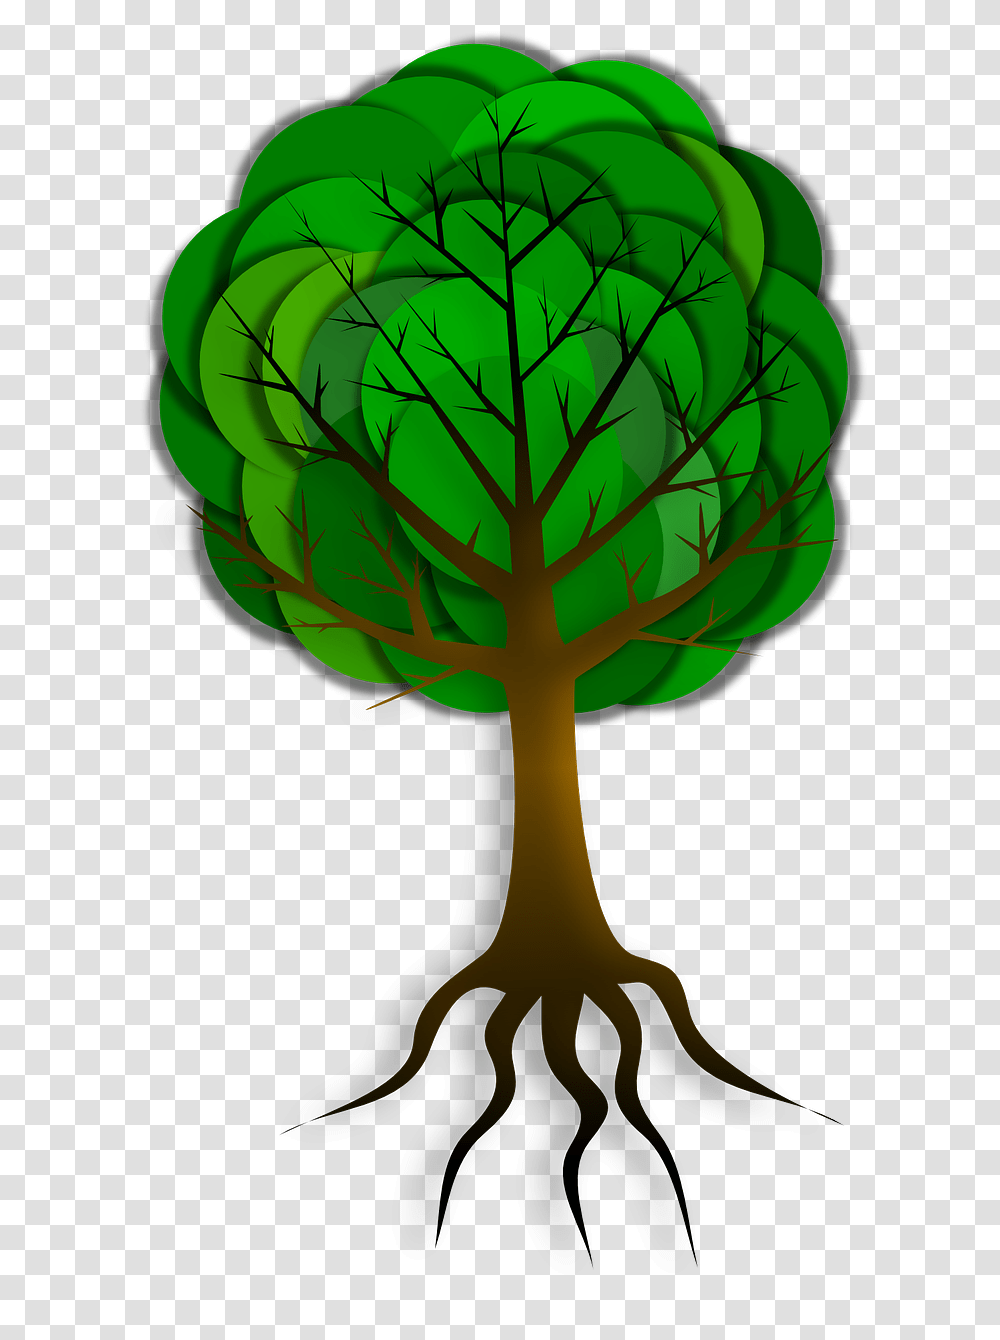 Tree Branches Roots Skeleton Image Tree, Plant, Vegetable, Food, Cabbage Transparent Png